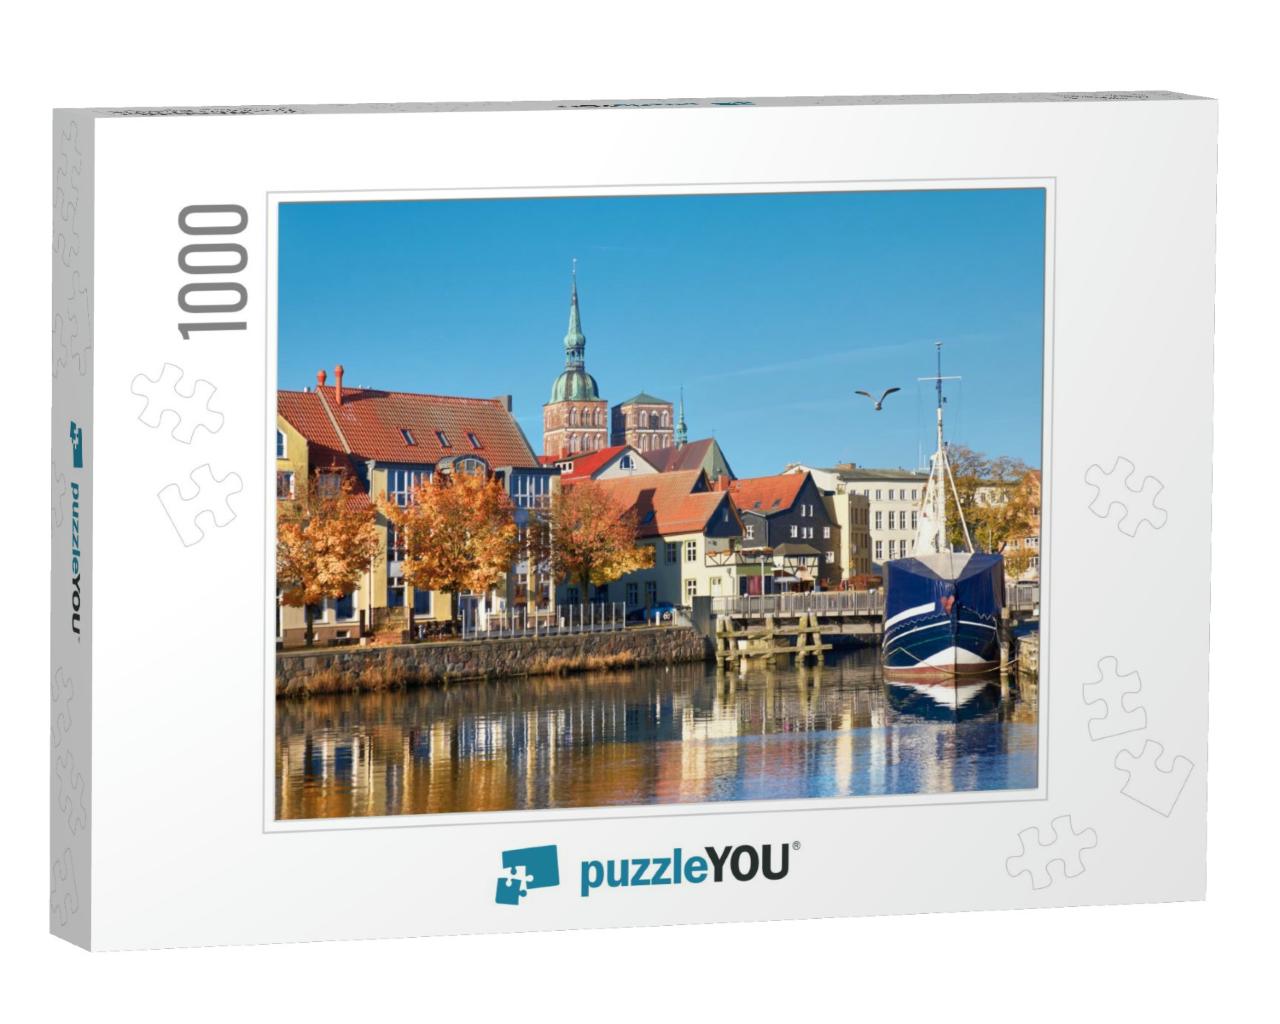 Docked Sail Boats & Houses Reflecting in Channel with Bri... Jigsaw Puzzle with 1000 pieces